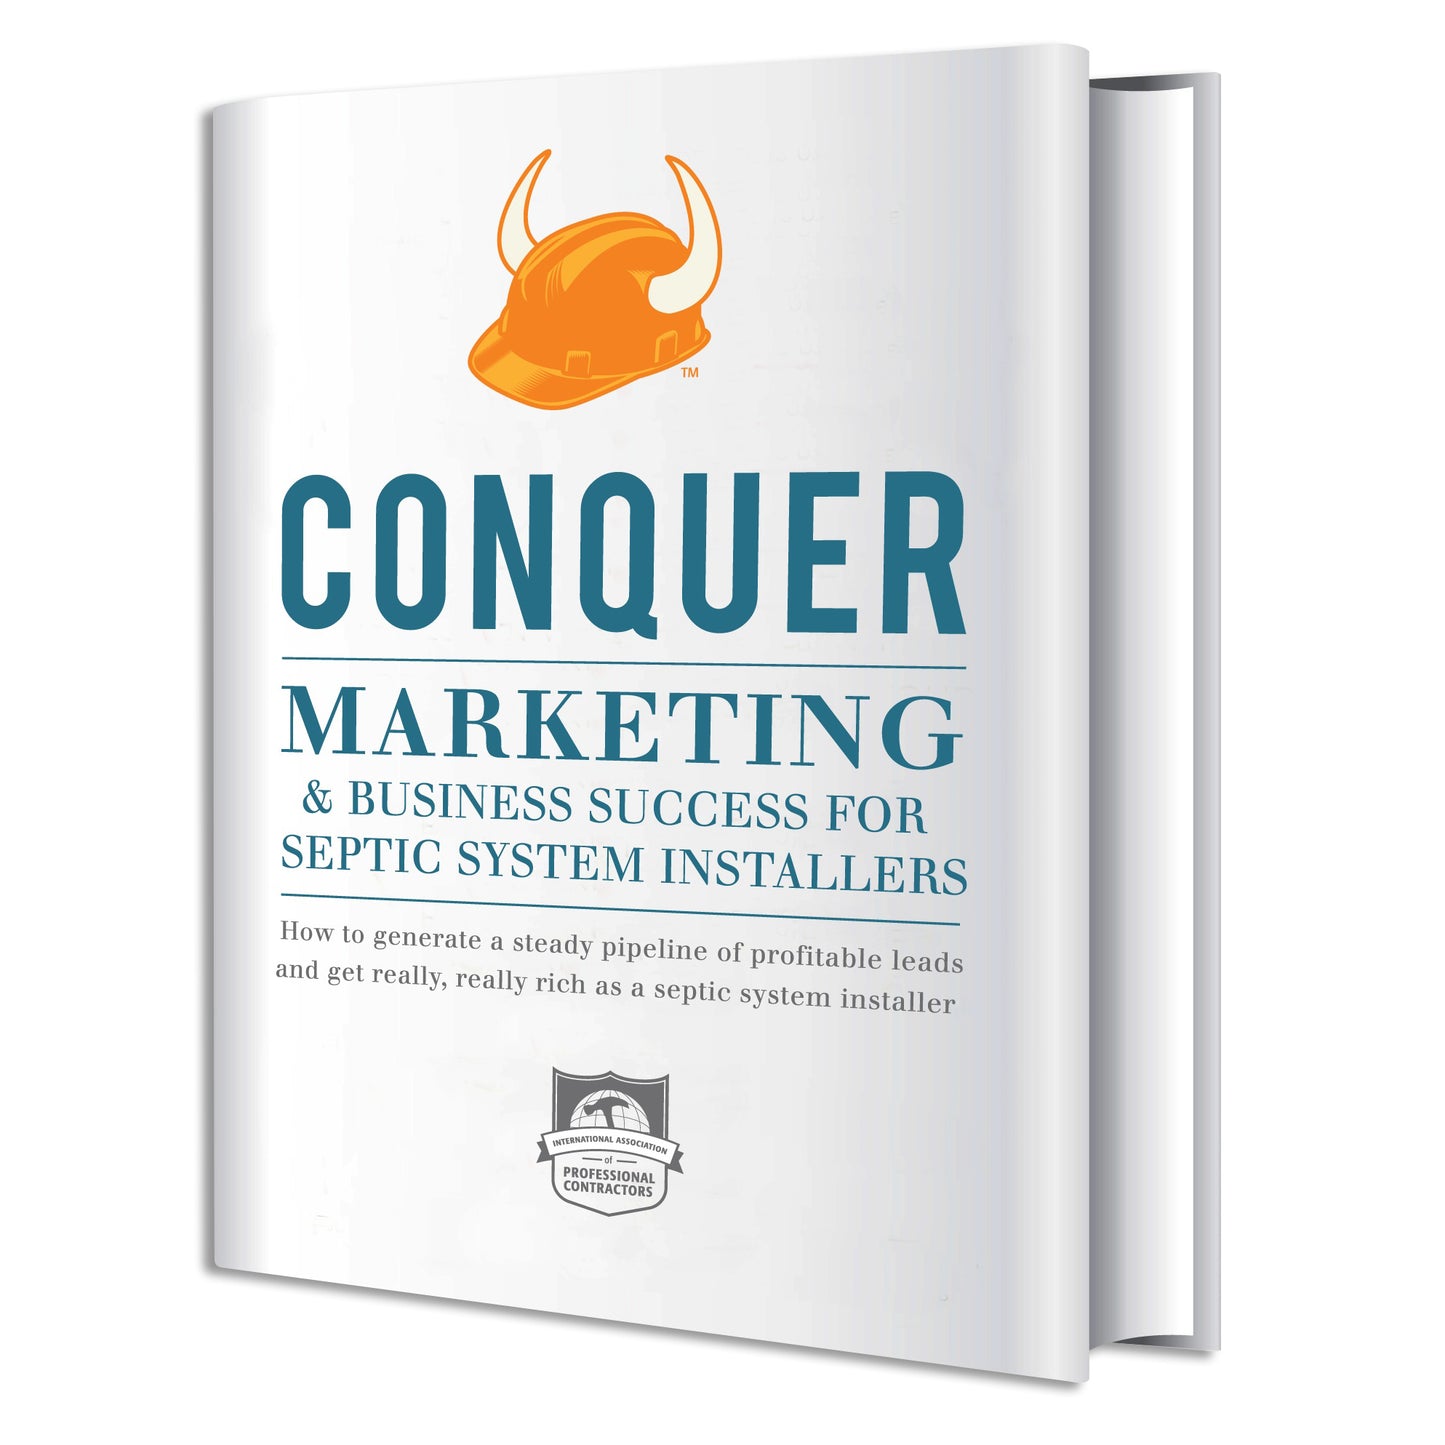 CONQUER Marketing and Business Success for Septic System Installers PDF